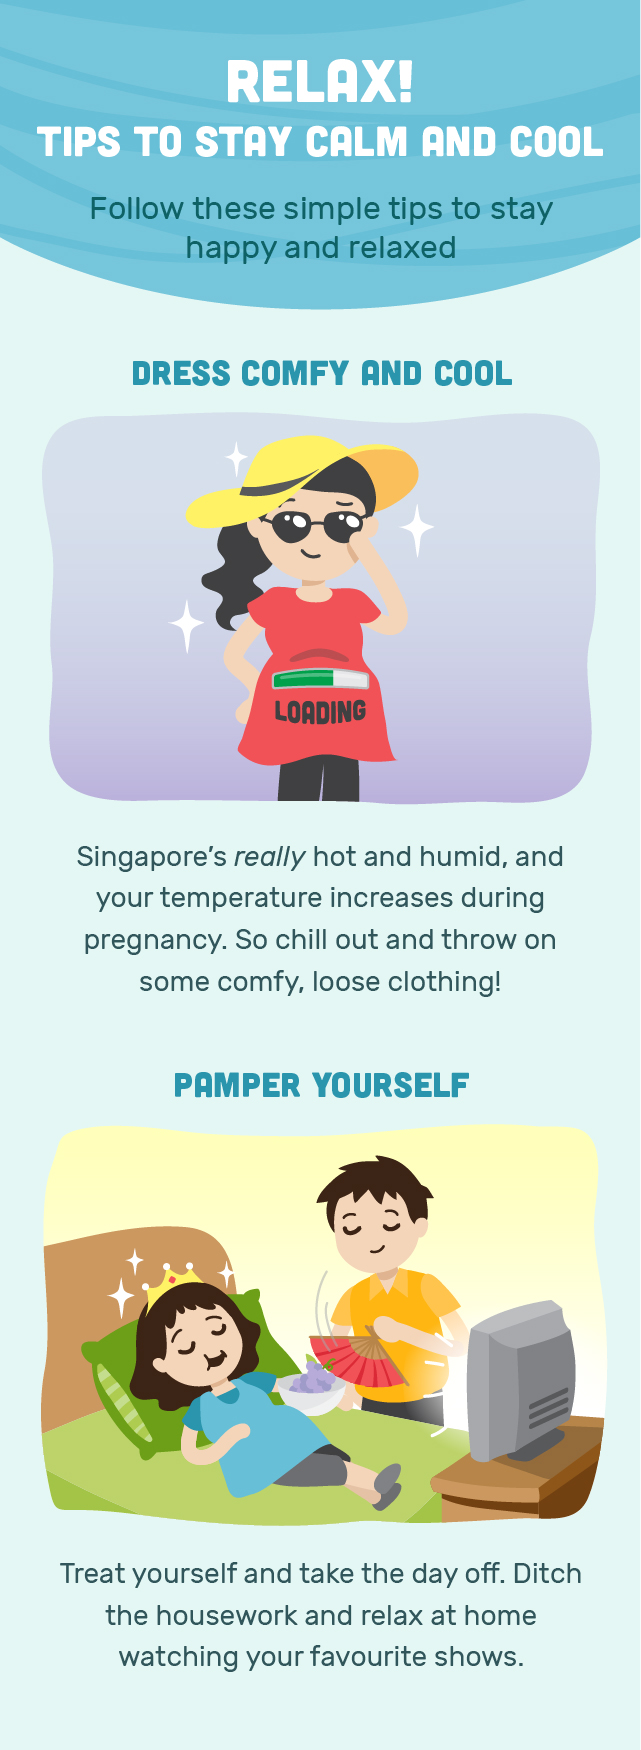 How_Does_Your_Body_Change_During_Pregnancy_INFOGRAPHIC